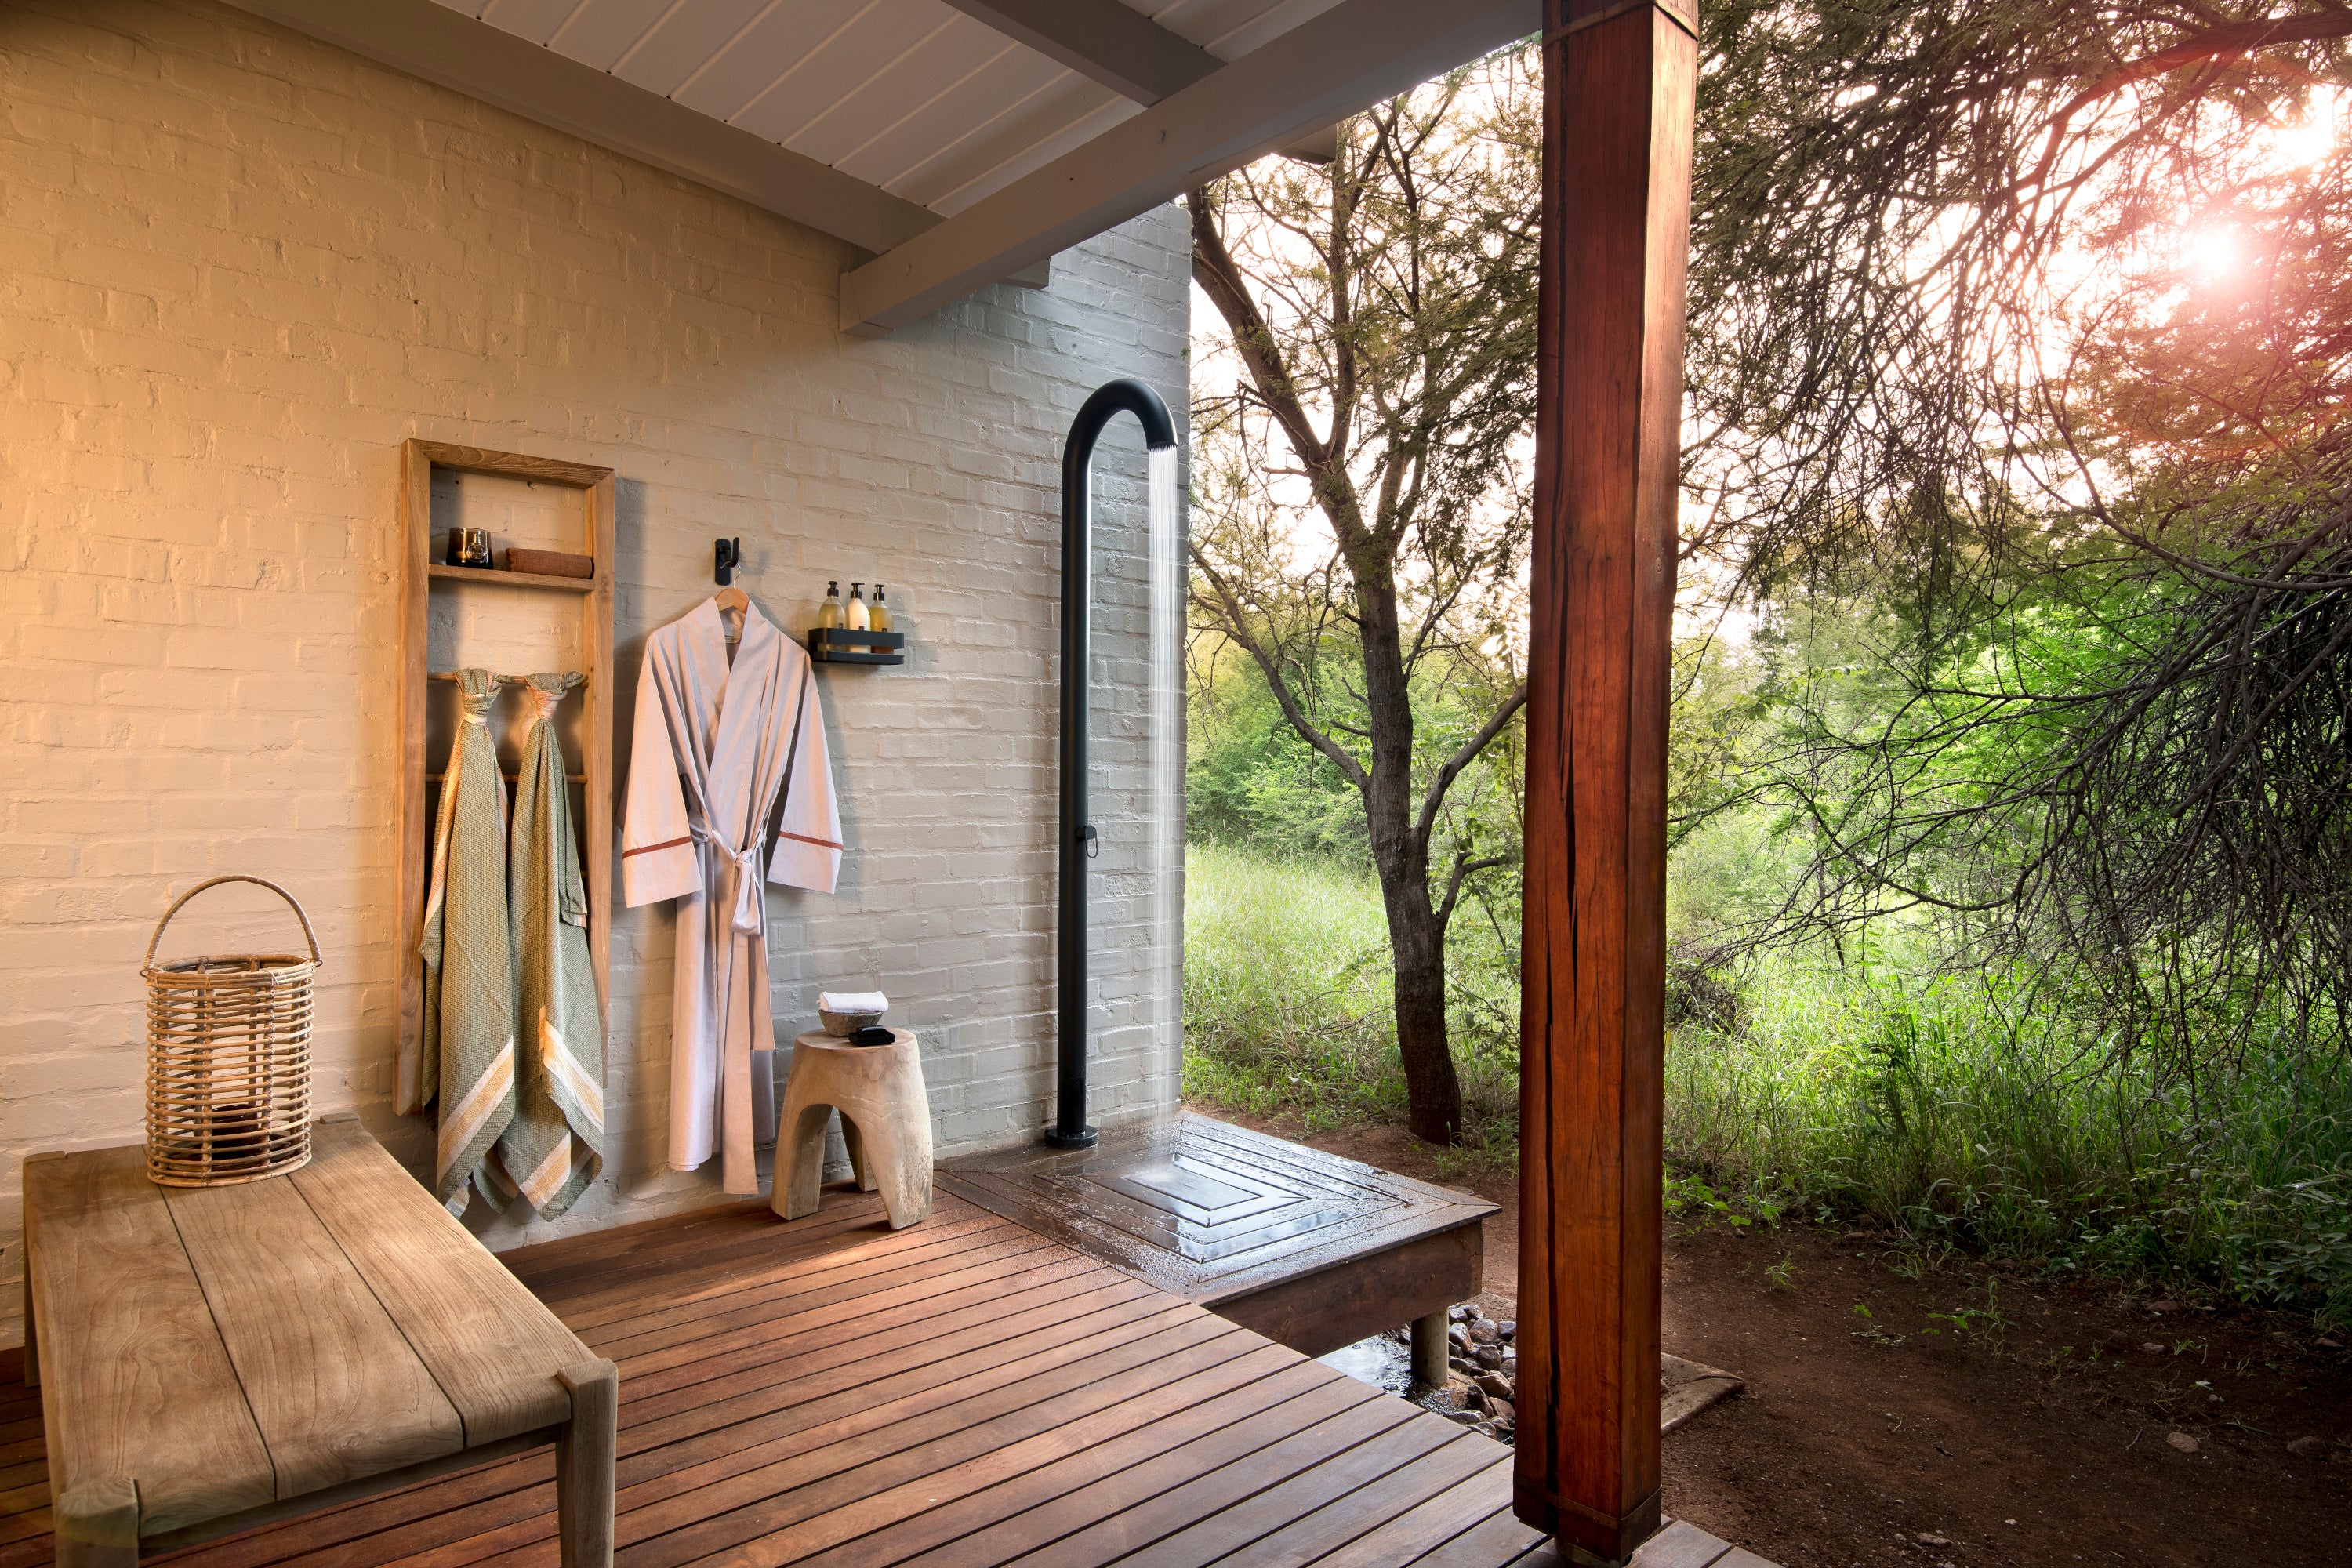 Announcing our collaboration with LB Outdoor Showers! Immerse in Dutch-inspired design for a stylish, eco-friendly outdoor shower experience